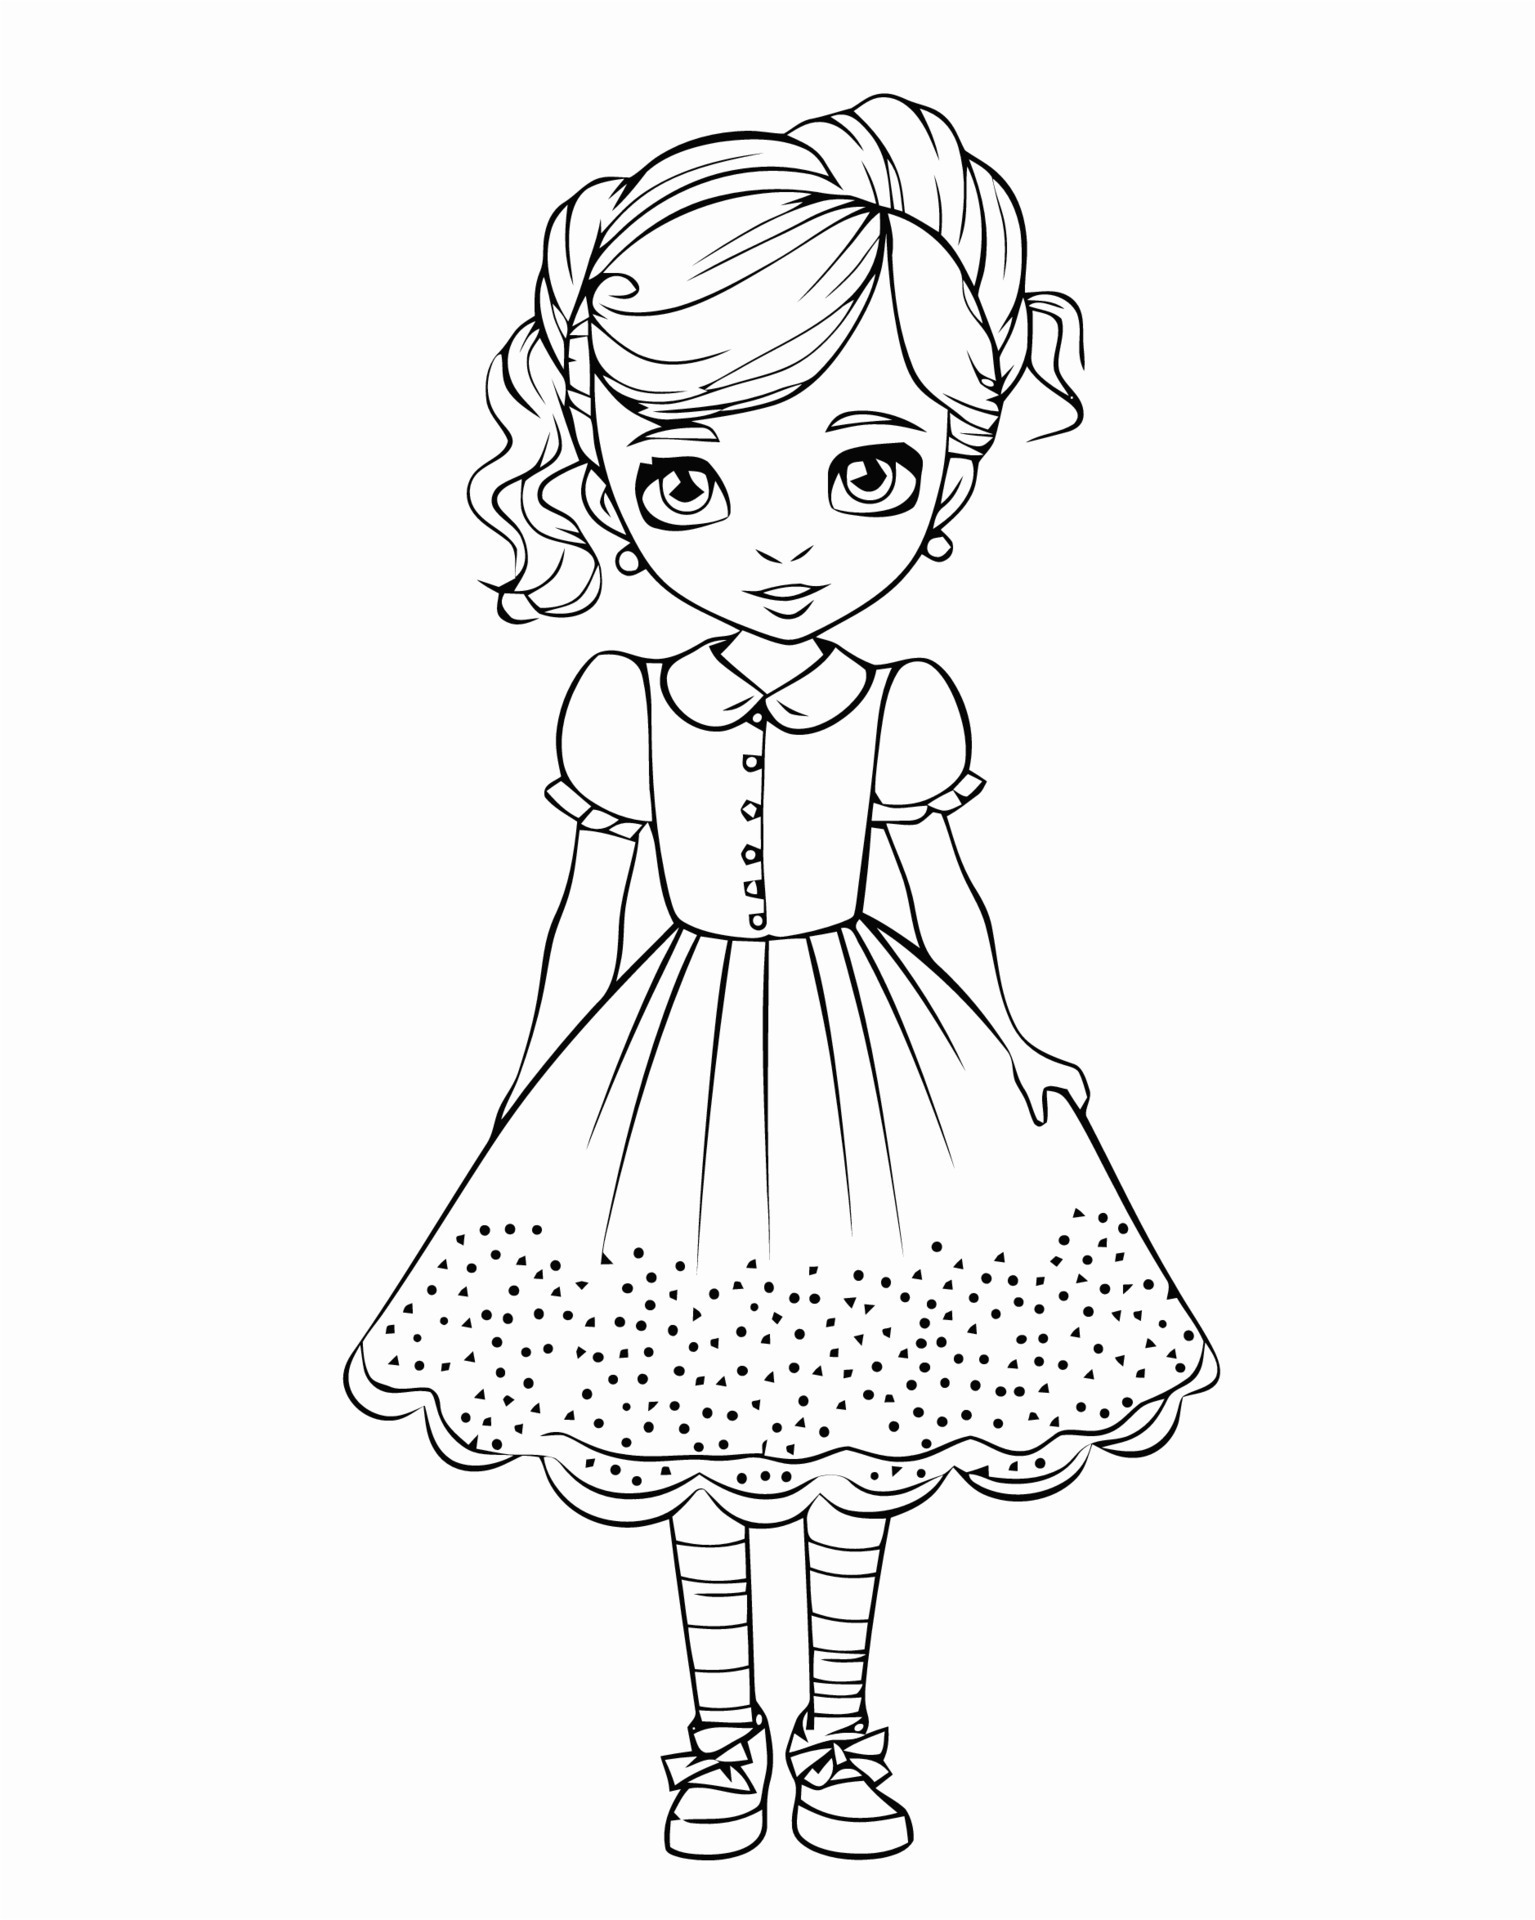 Barbie Fashion Dress Coloring Page Graphic By Creative King · Creative  Fabrica | lupon.gov.ph